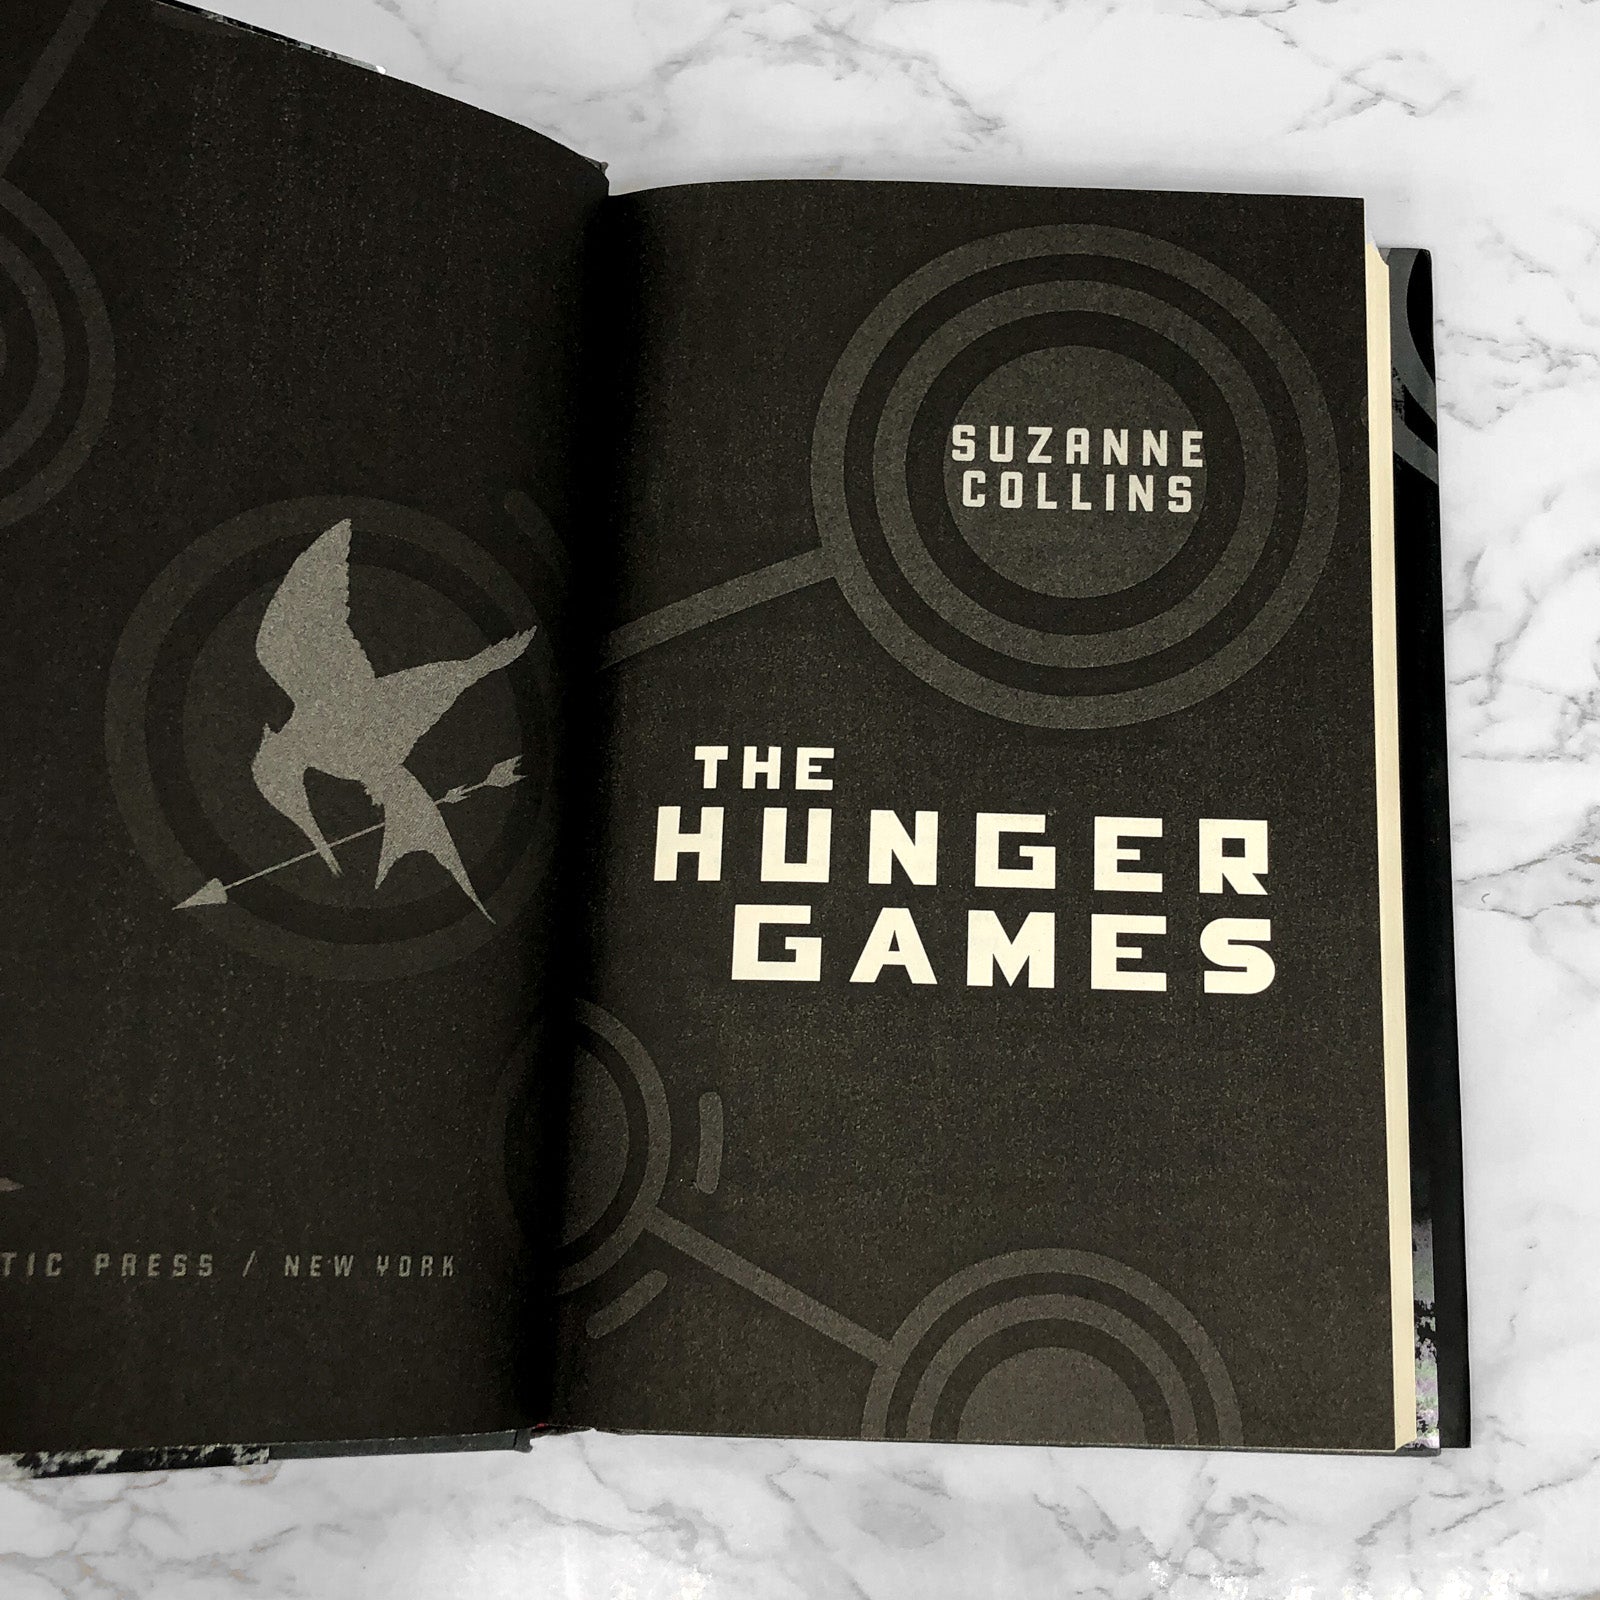 The Hunger Games Collection by Suzanne Collins